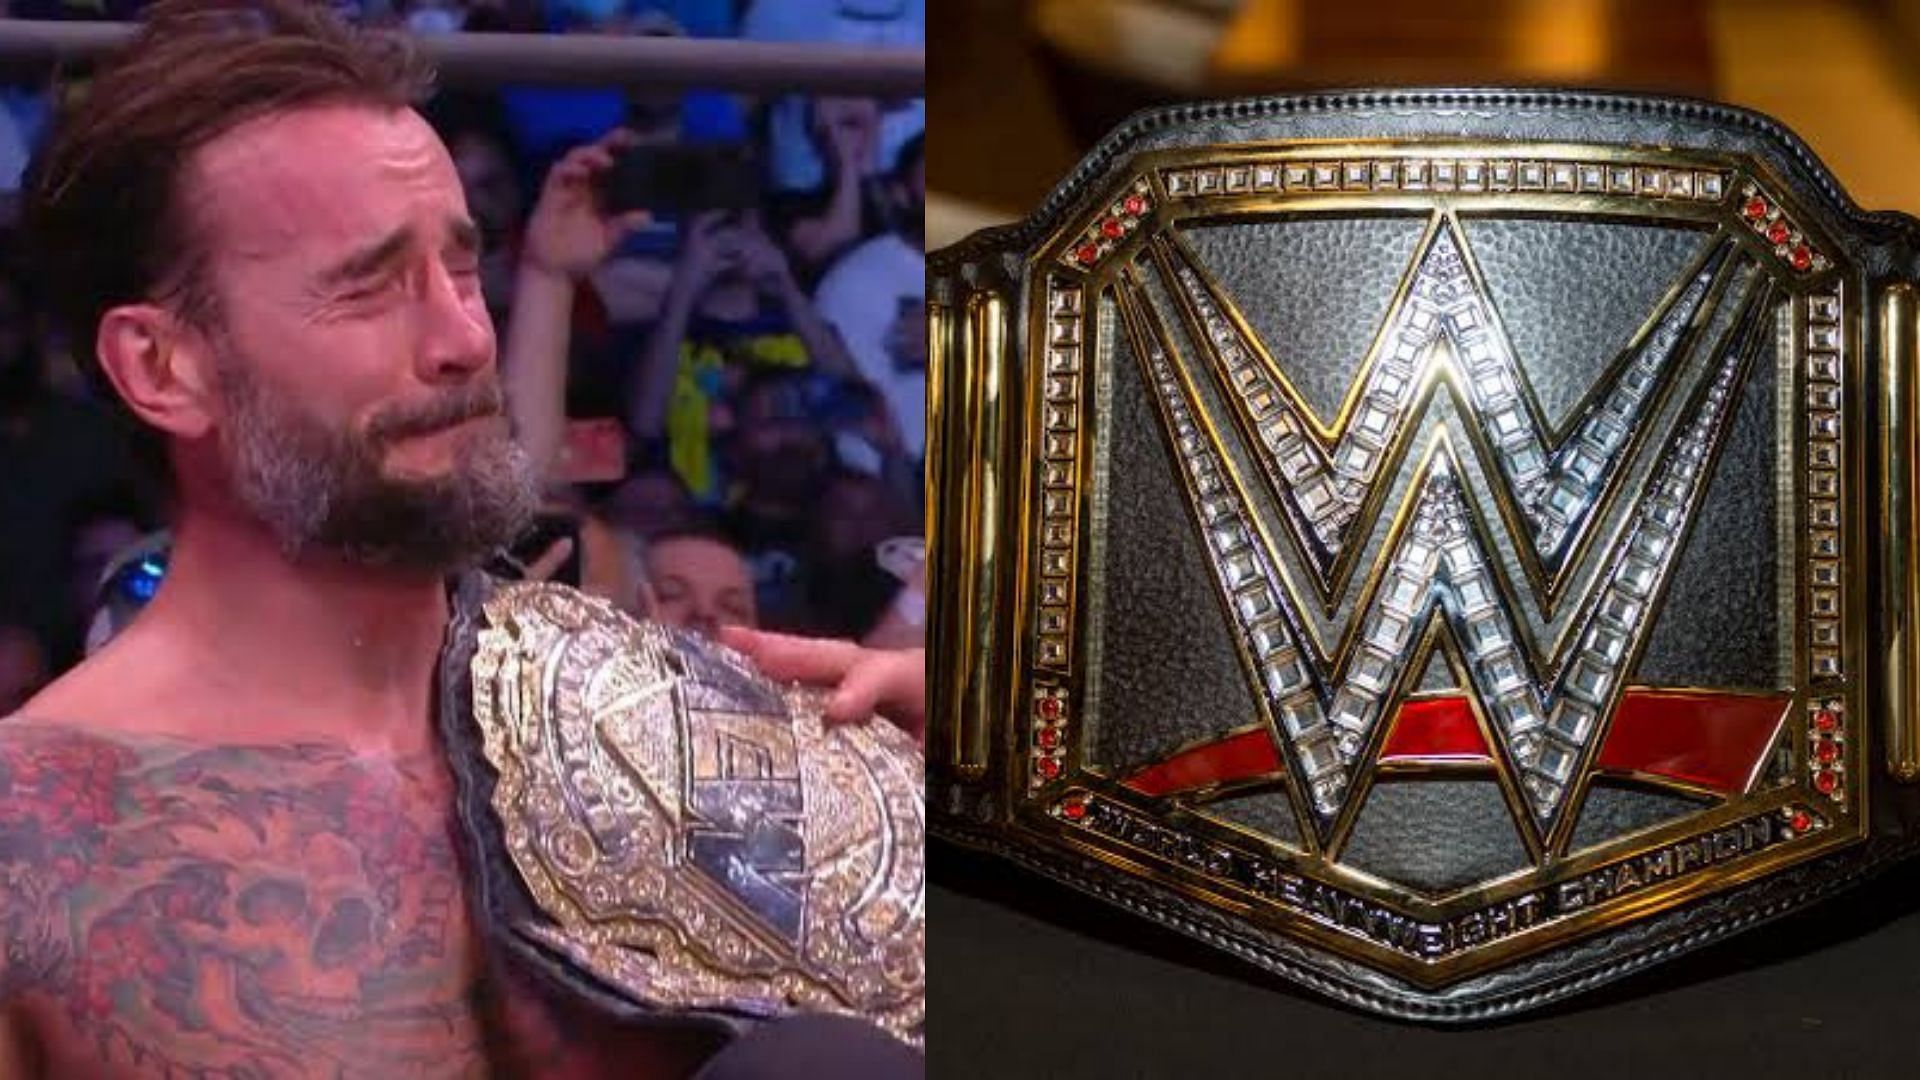 CM Punk won a world title after almost a decade.